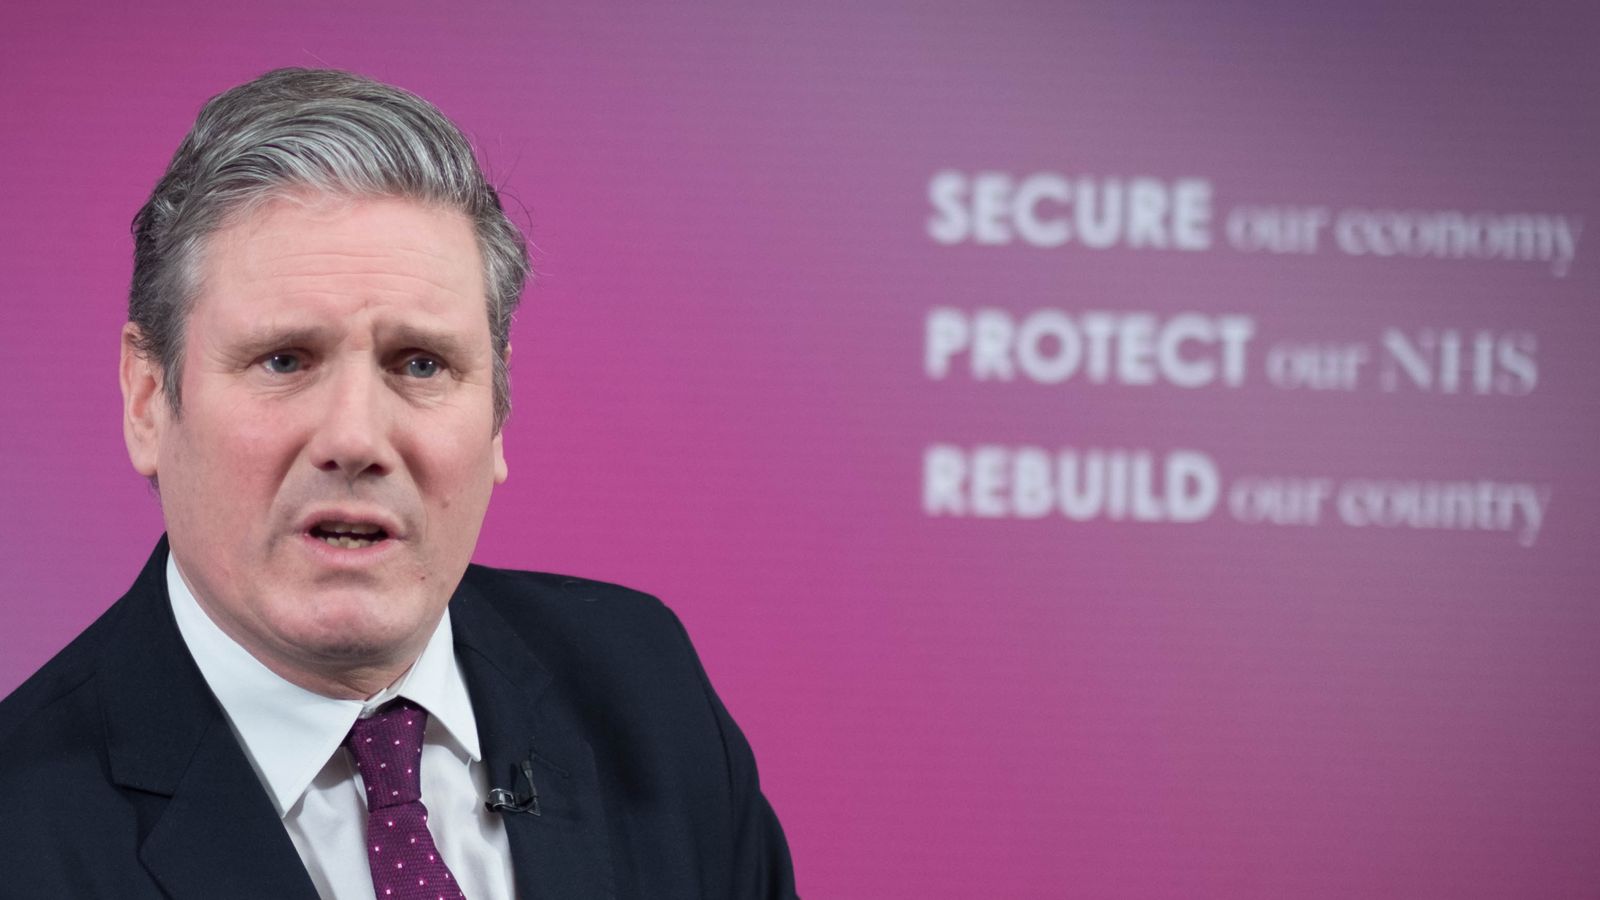 COVID-19: 'We can't return to business as usual,' says Sir Keir Starmer as he sets out post-coronavirus vision